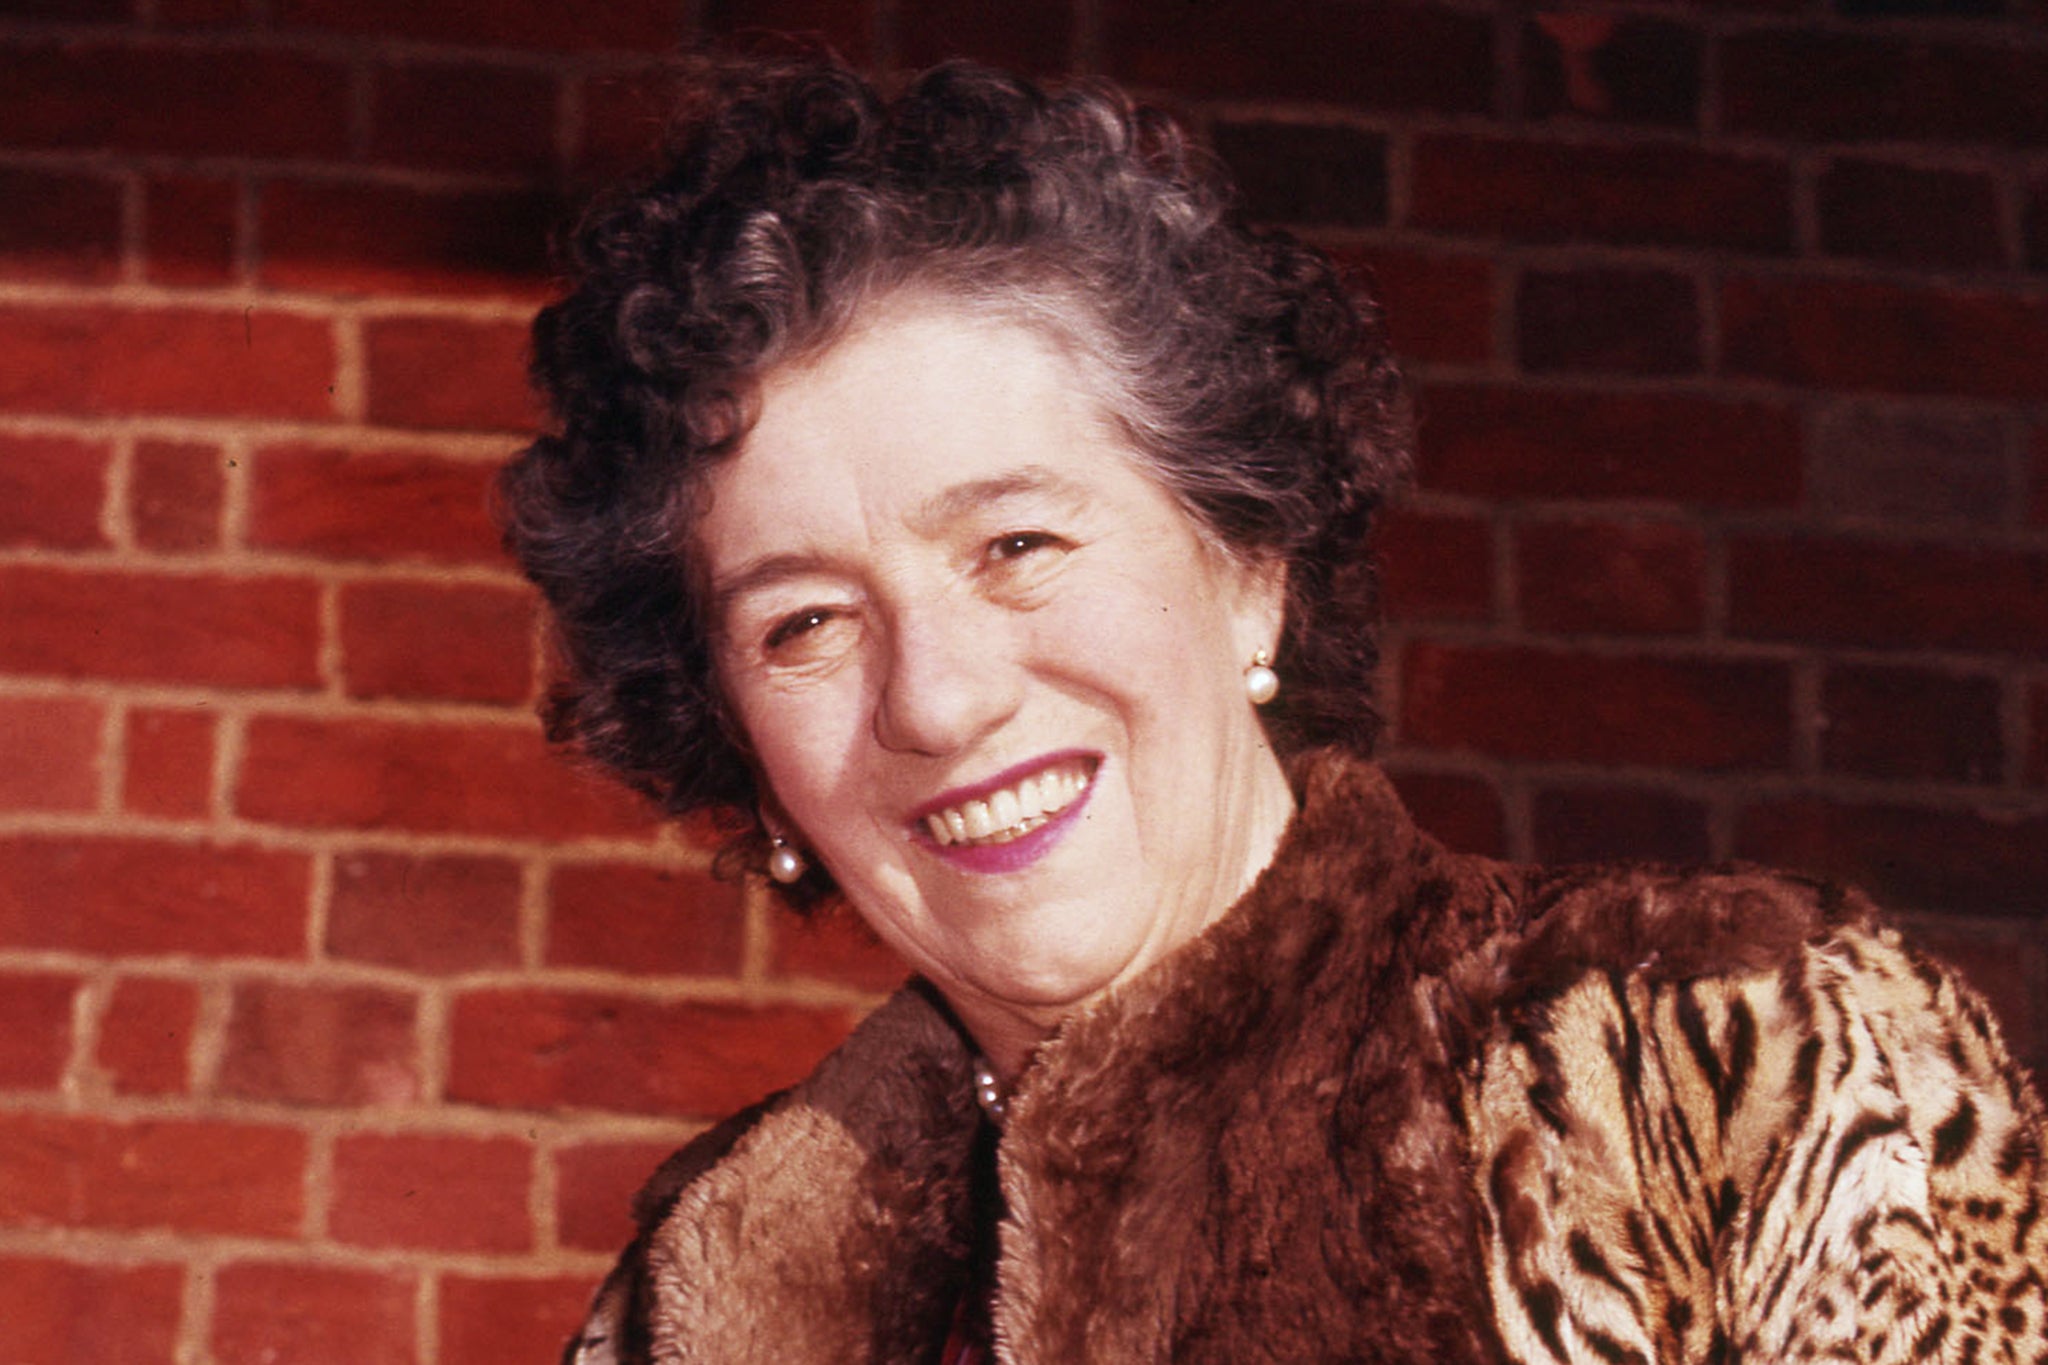 Enid Blyton outside the home she shared with her first husband in Beaconsfield